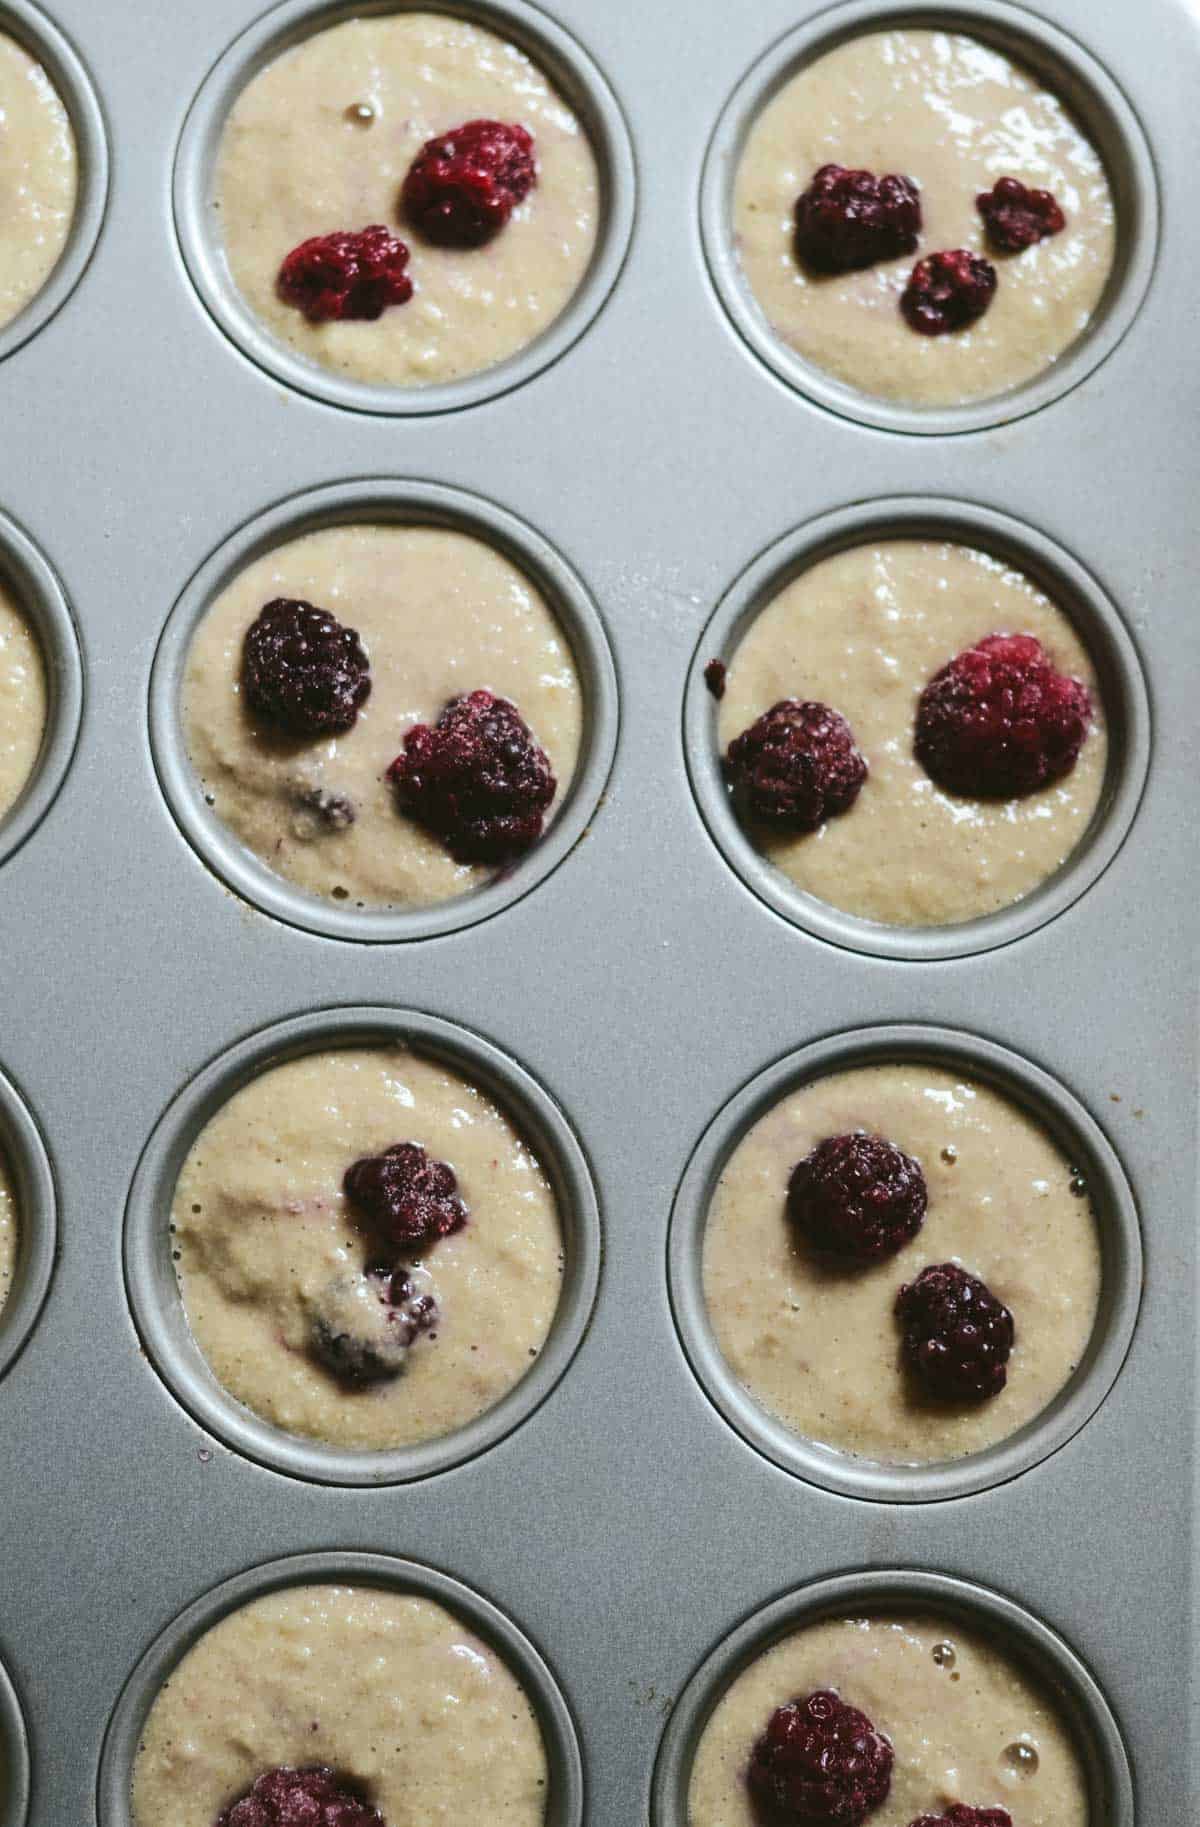 Muffin batter in greased muffin tray with blackberries on top.